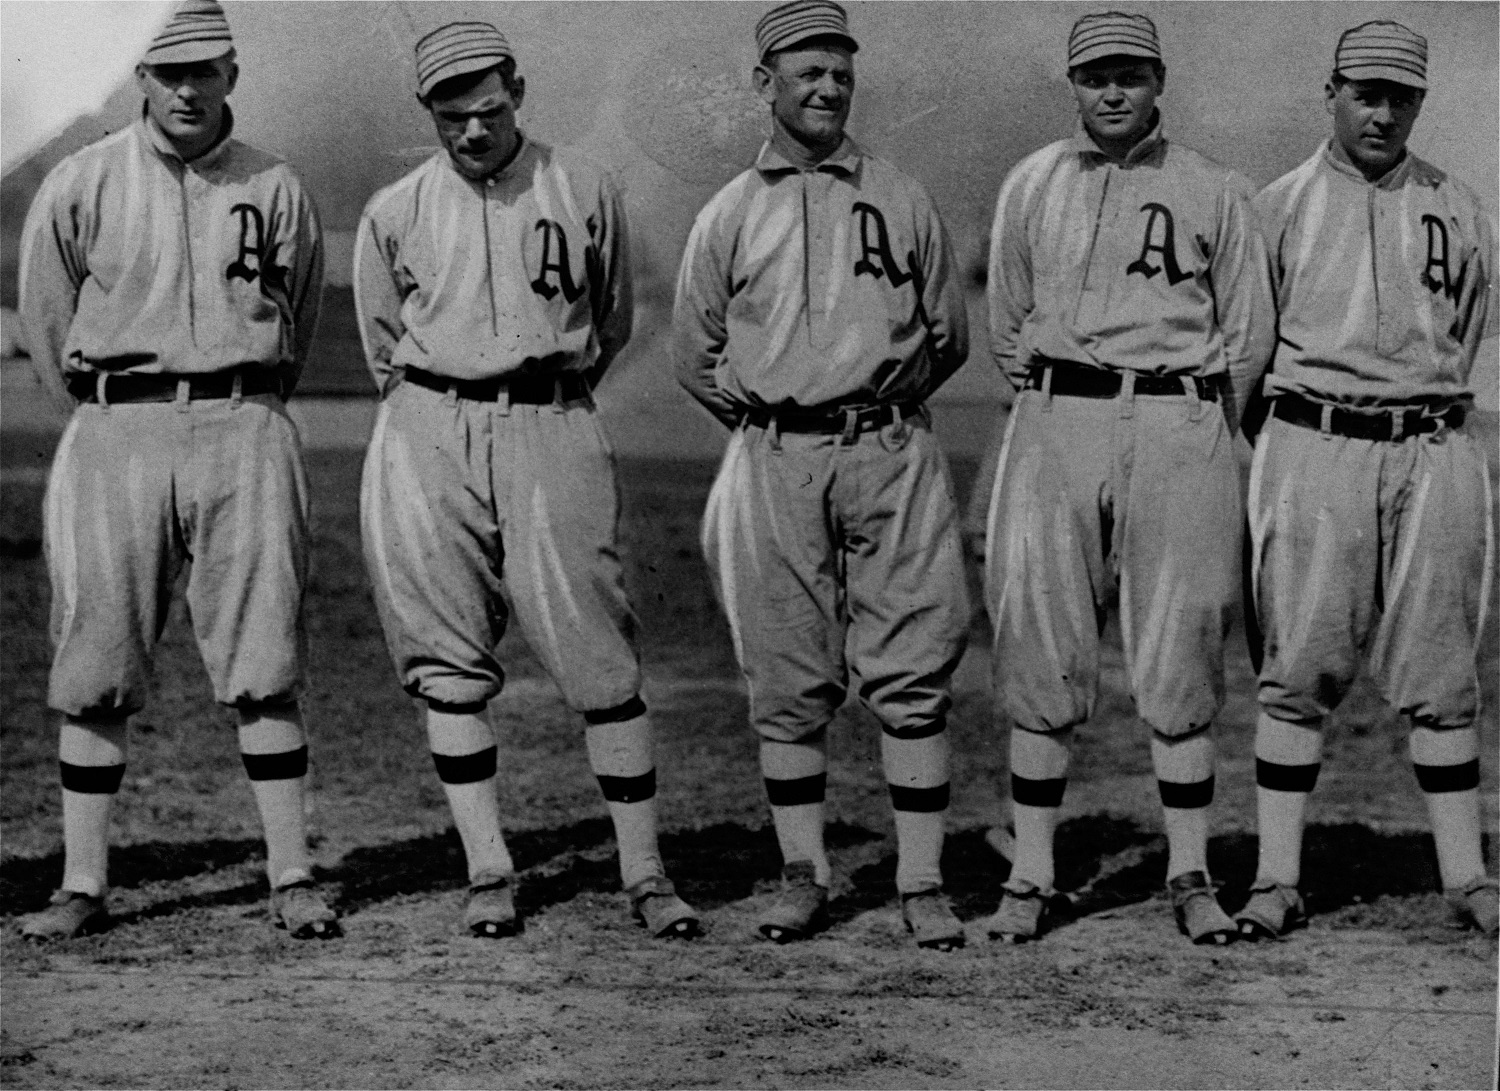 Here are some of the bulwarks of Connie Mack's team in 1913 when the Philadelphia Athletics beat the New York Giants in the World Series four games to one.  From left:  Rube Oldring, Eddie Murphy, Danny Murphy, Amos Strunk, and Jimmy Walsh. (AP Photo)